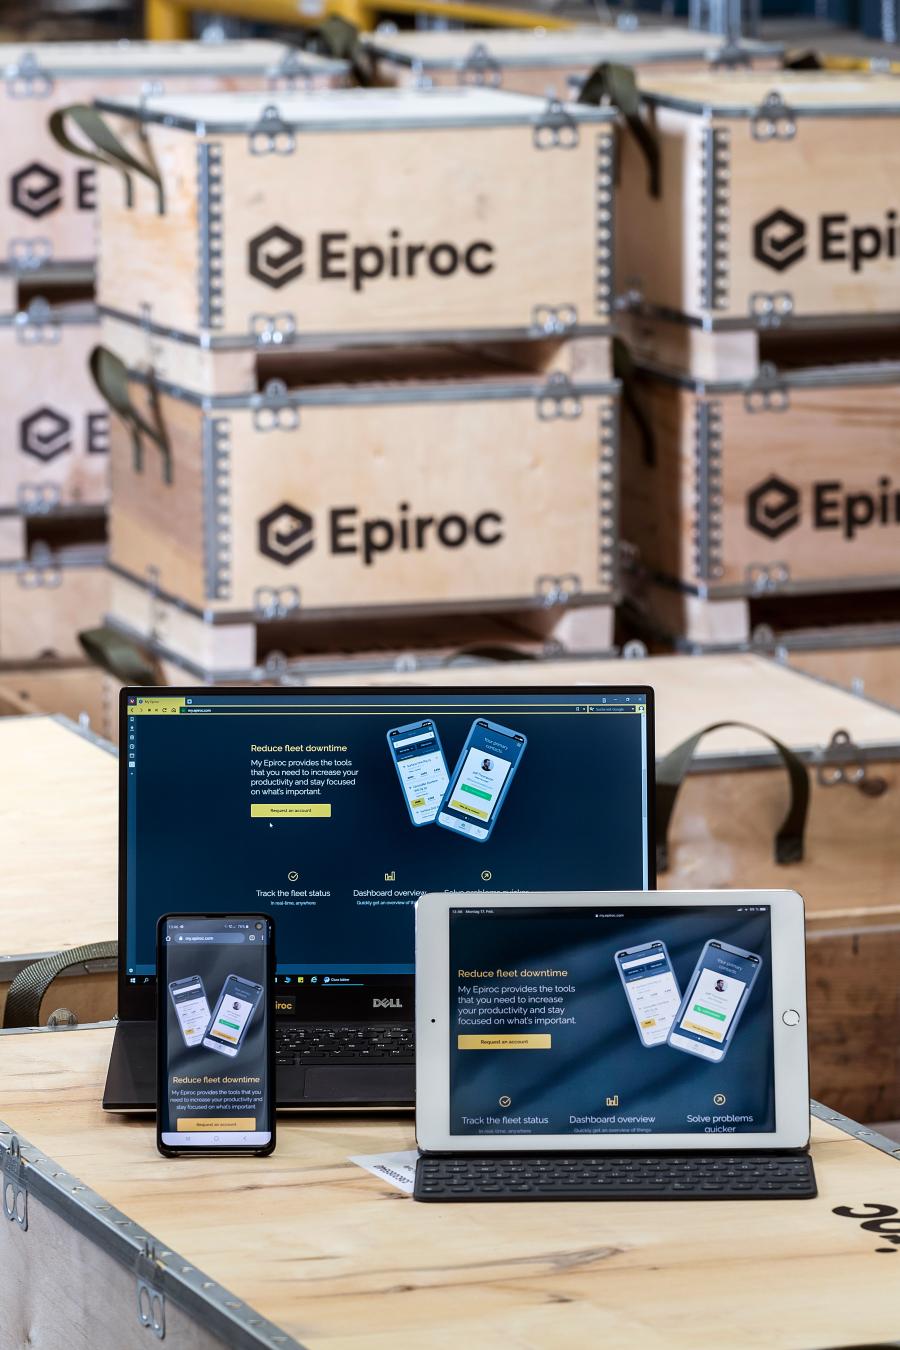 Once connected, the system monitors every individual tool and keep customers updated via My Epiroc.